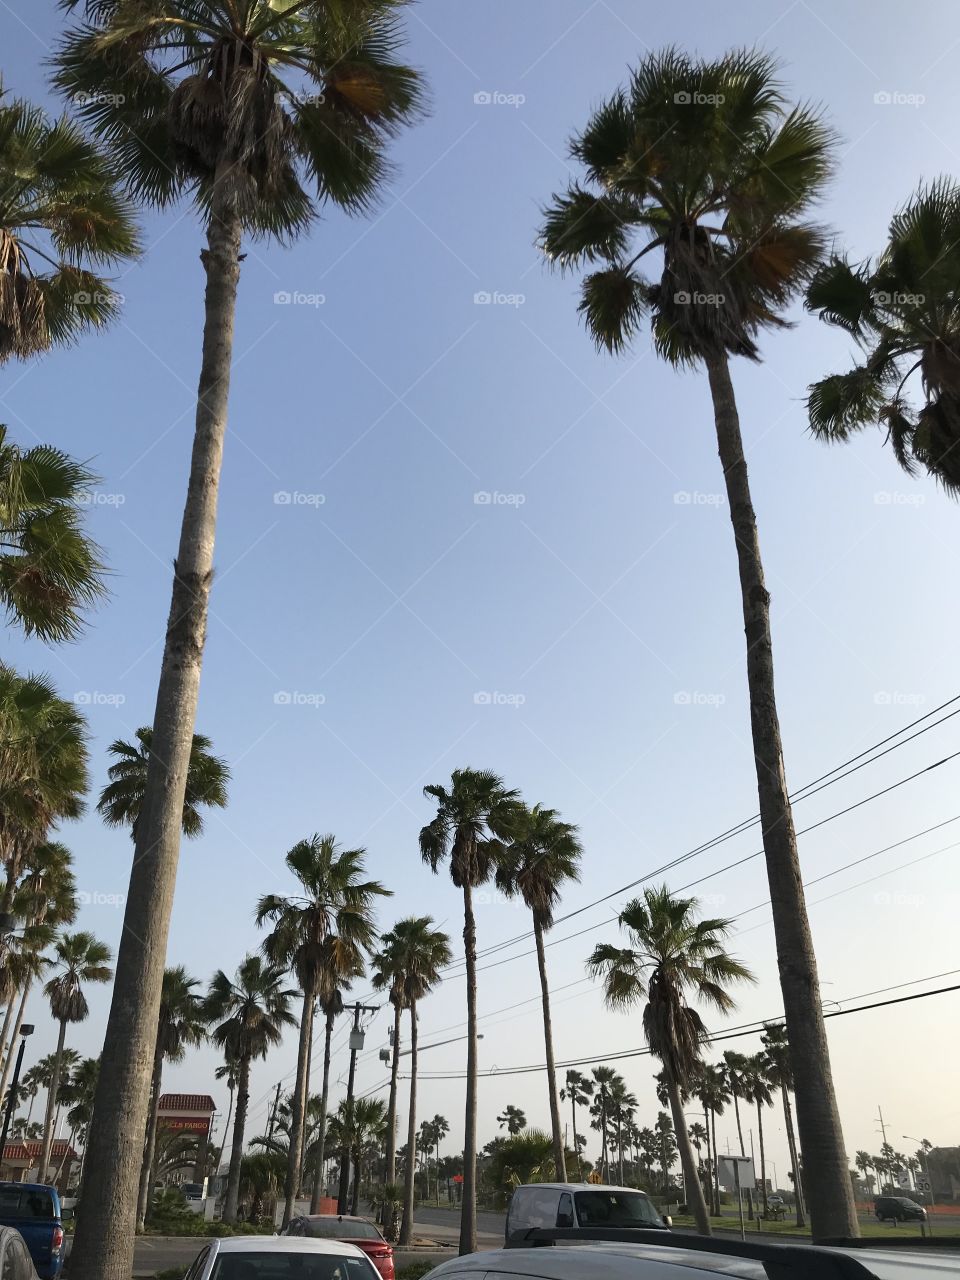 Palm Trees, sunny skies and good vibes! Full on vacation mode while cruising down the road in South Padre Island!